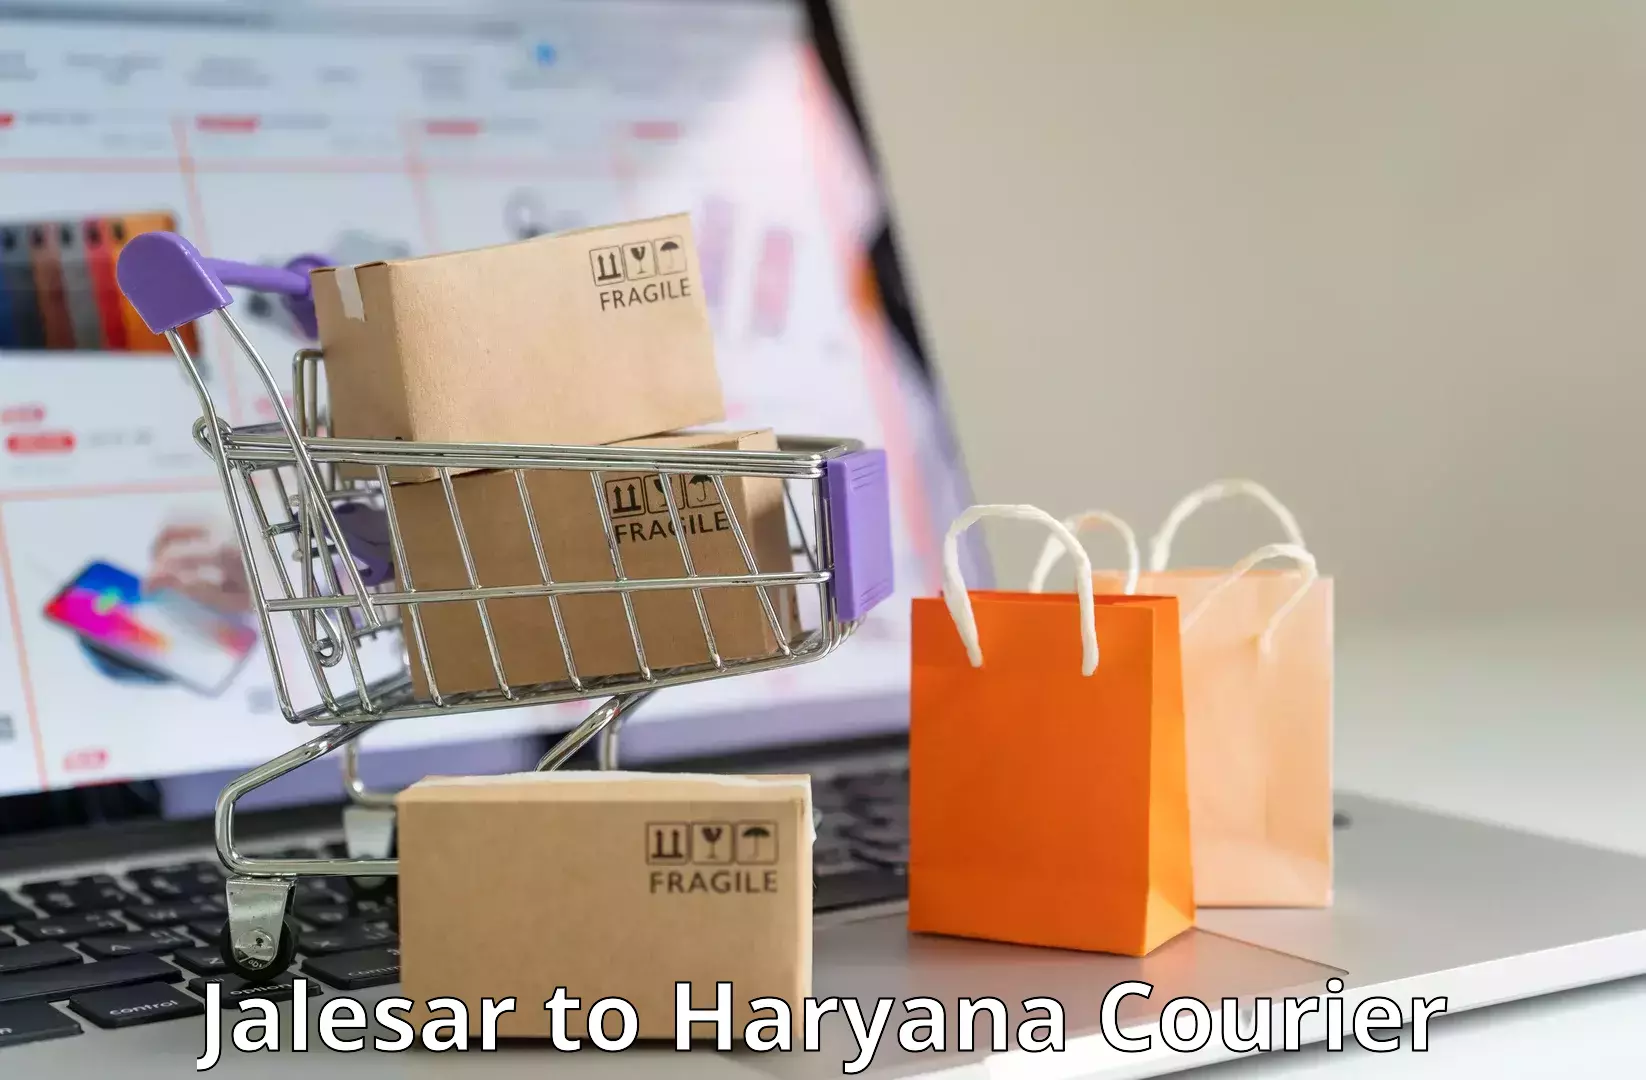 Efficient shipping operations Jalesar to NCR Haryana